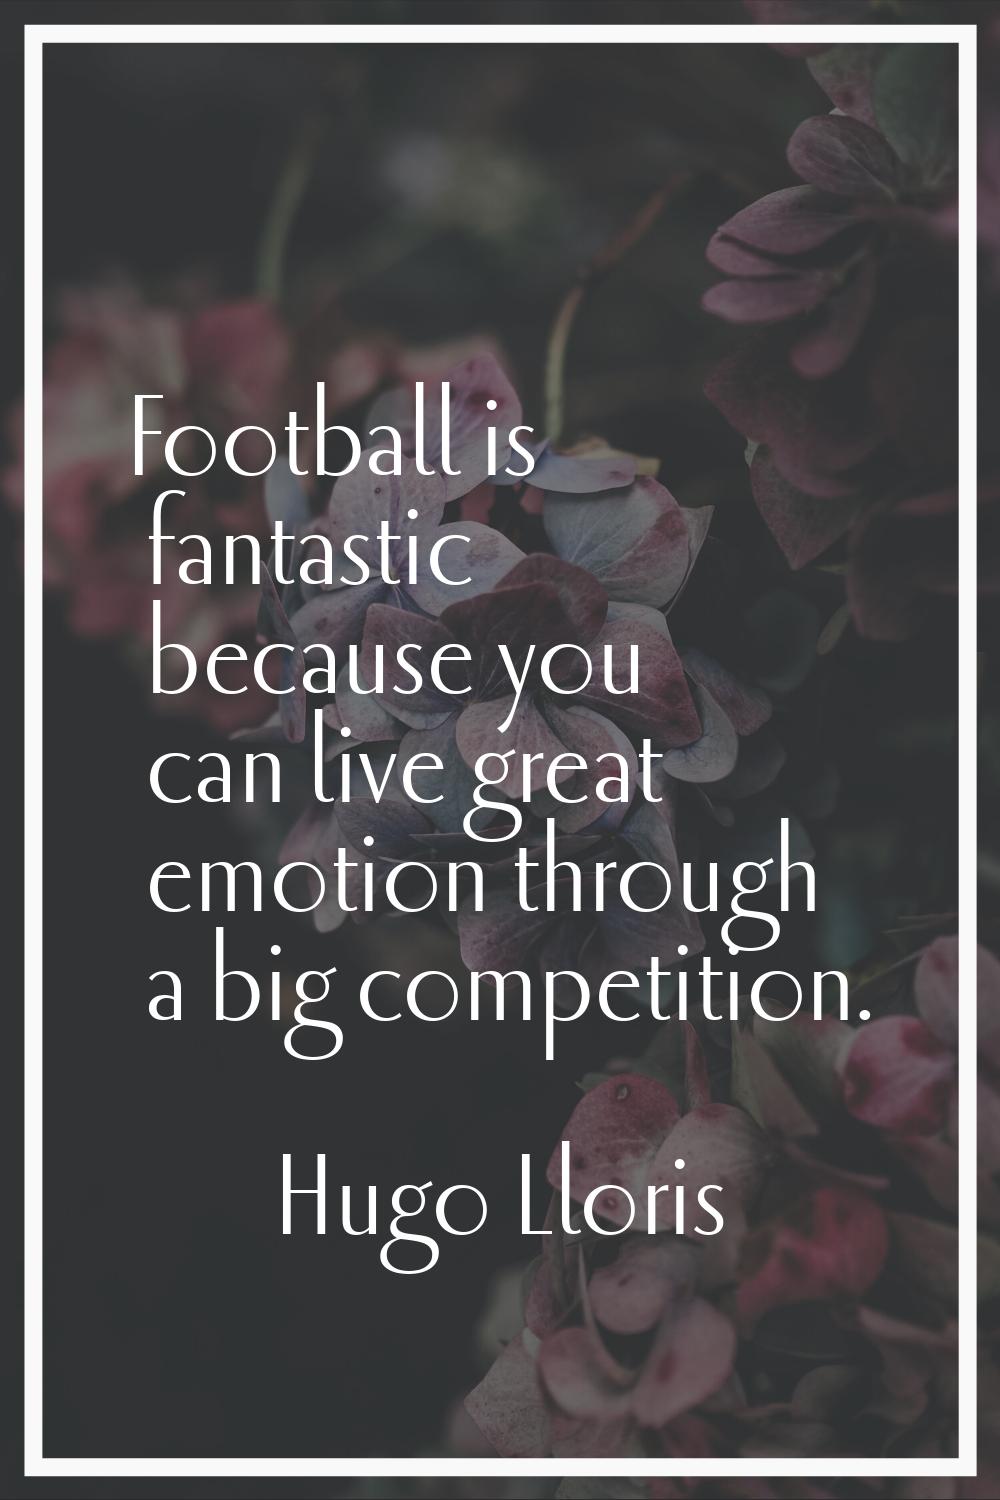 Football is fantastic because you can live great emotion through a big competition.